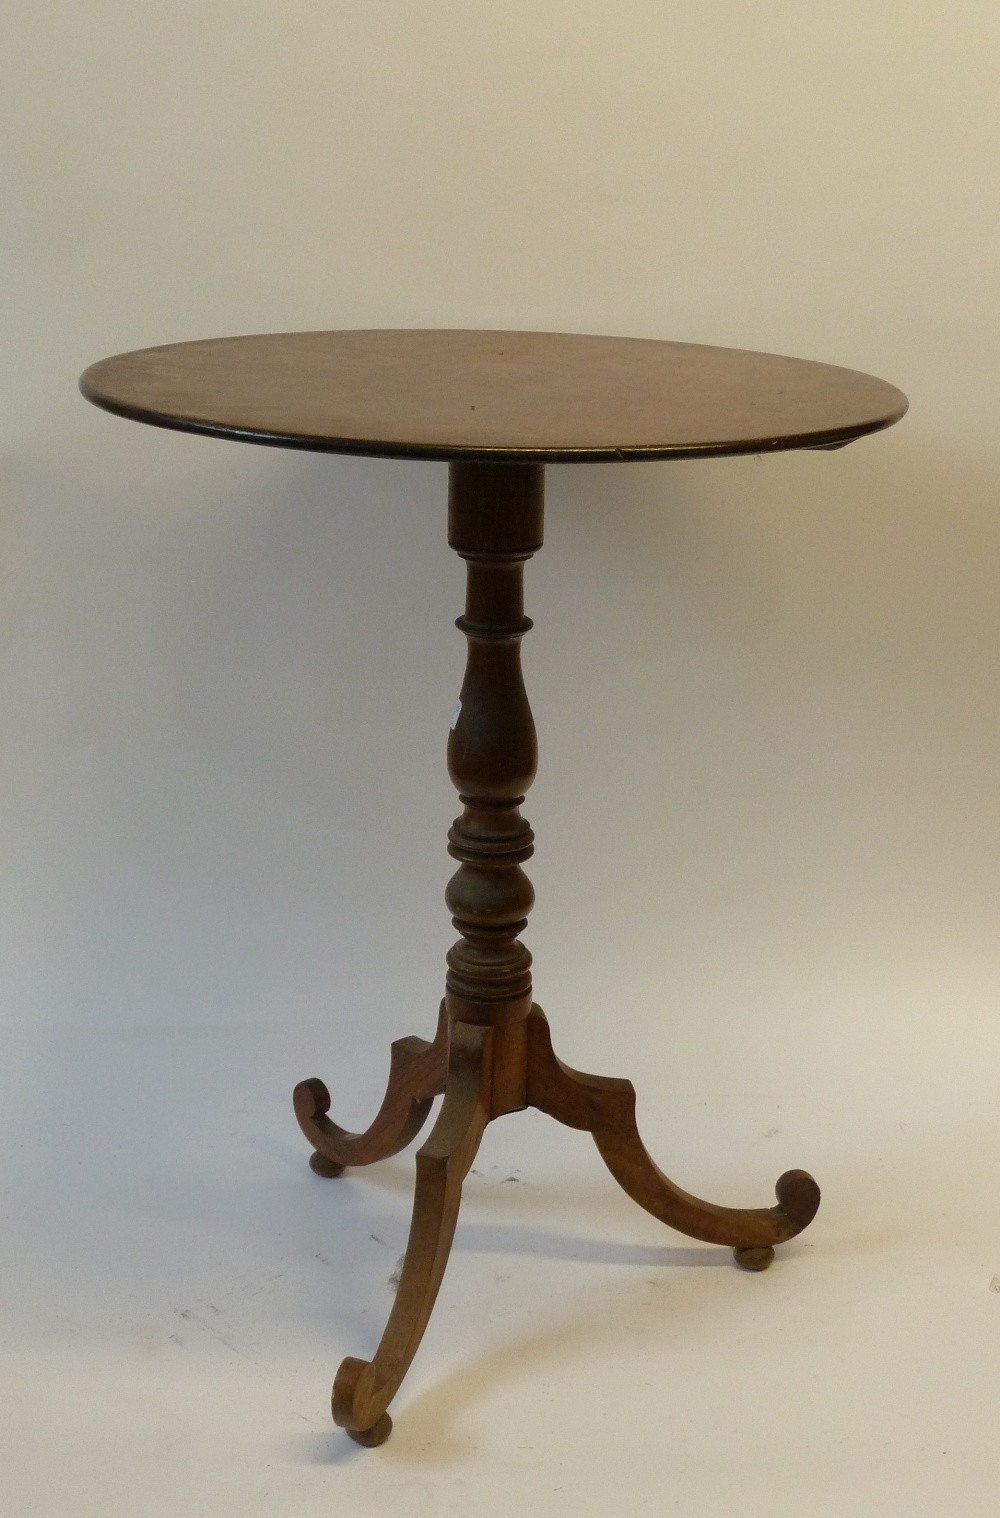 NINETEENTH CENTURY MAHOGANY TRIPOD OCCASIONAL TABLE, the circular top above a turned column raised